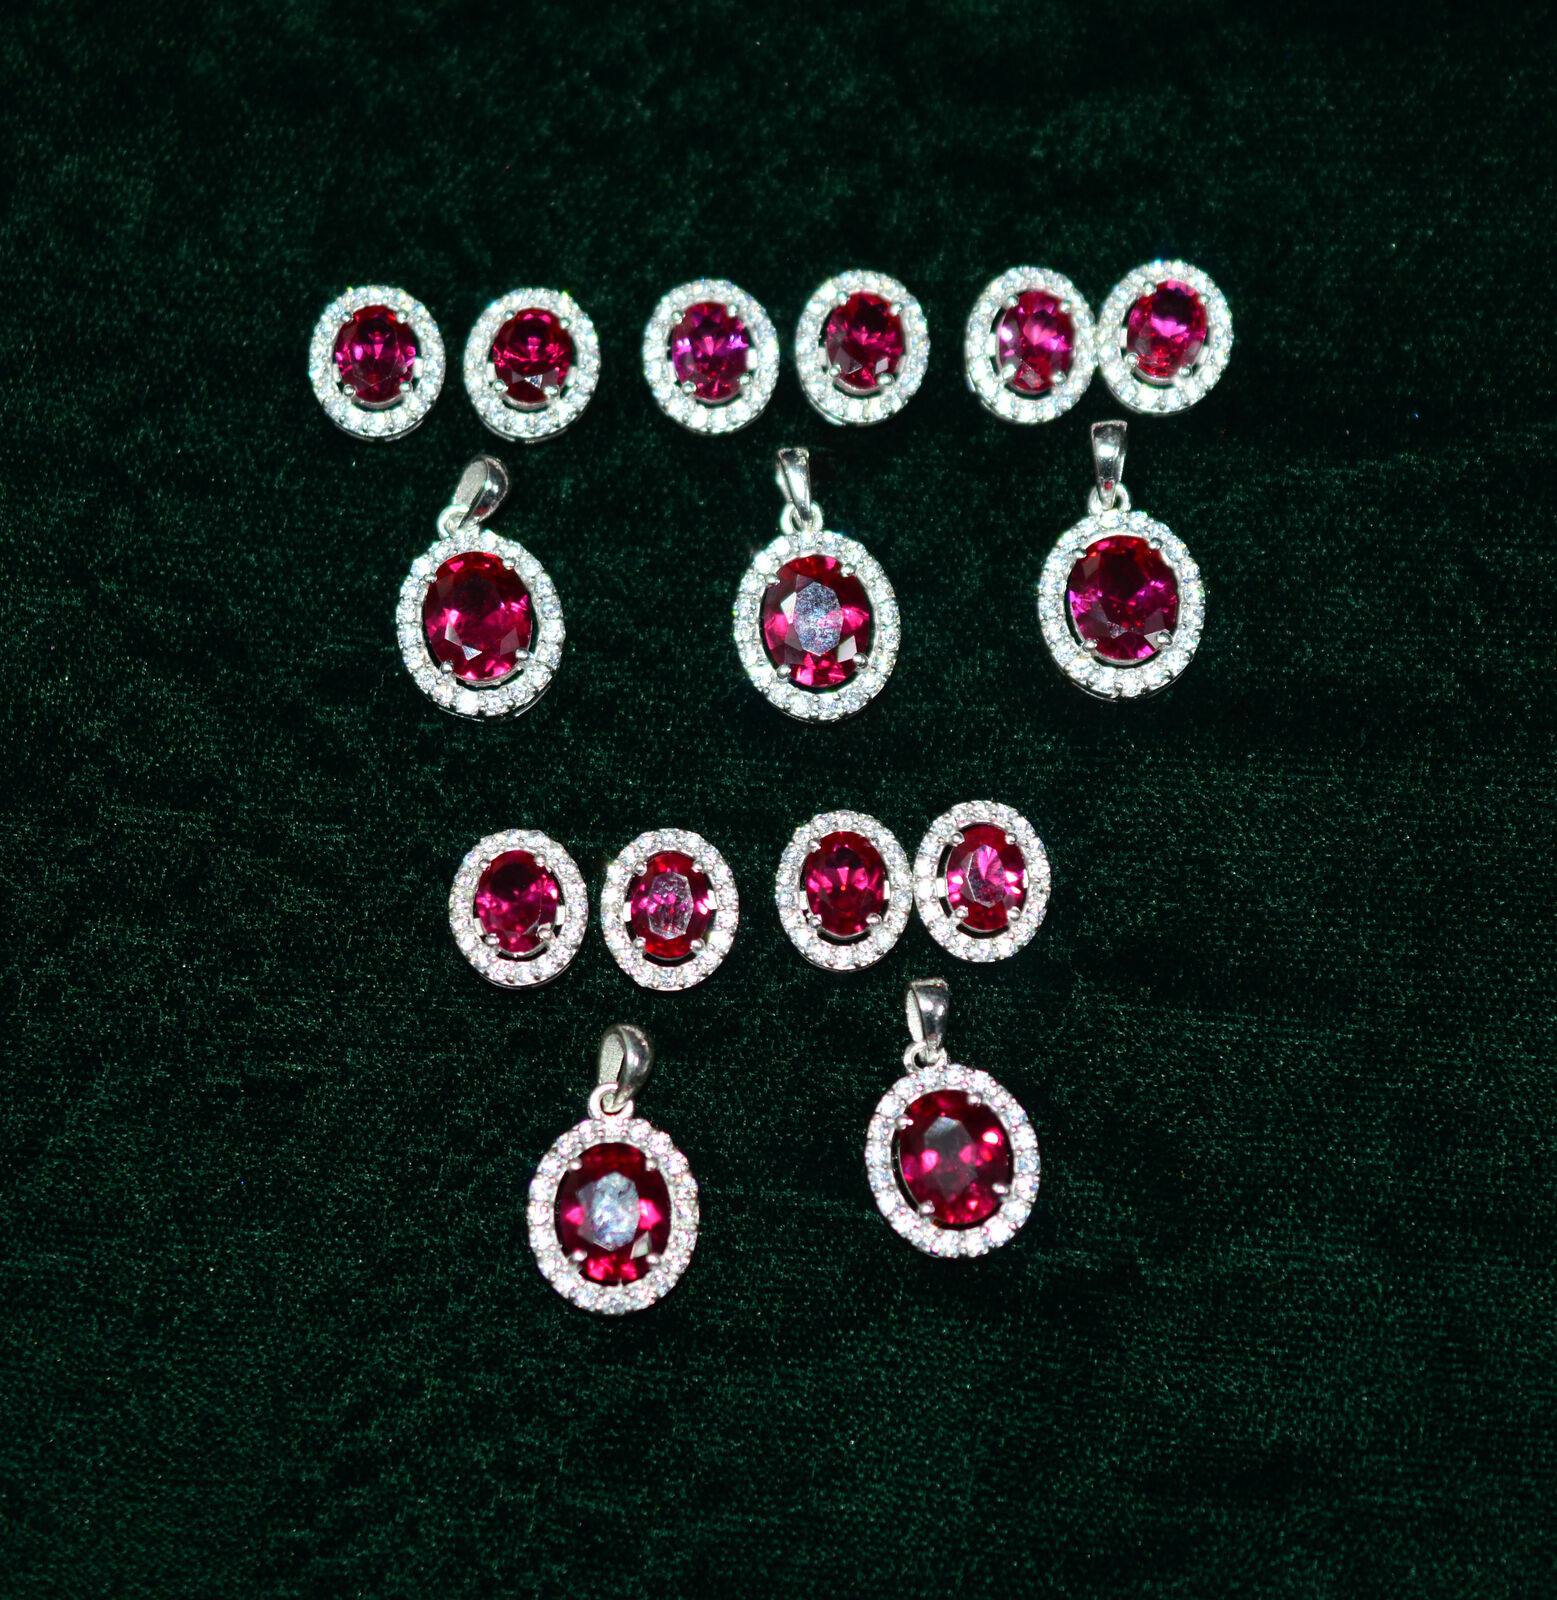 Wholesale 5pc 925 Sterling Silver Cut Red Ruby Topaz Earring Pendant Set  0 P810